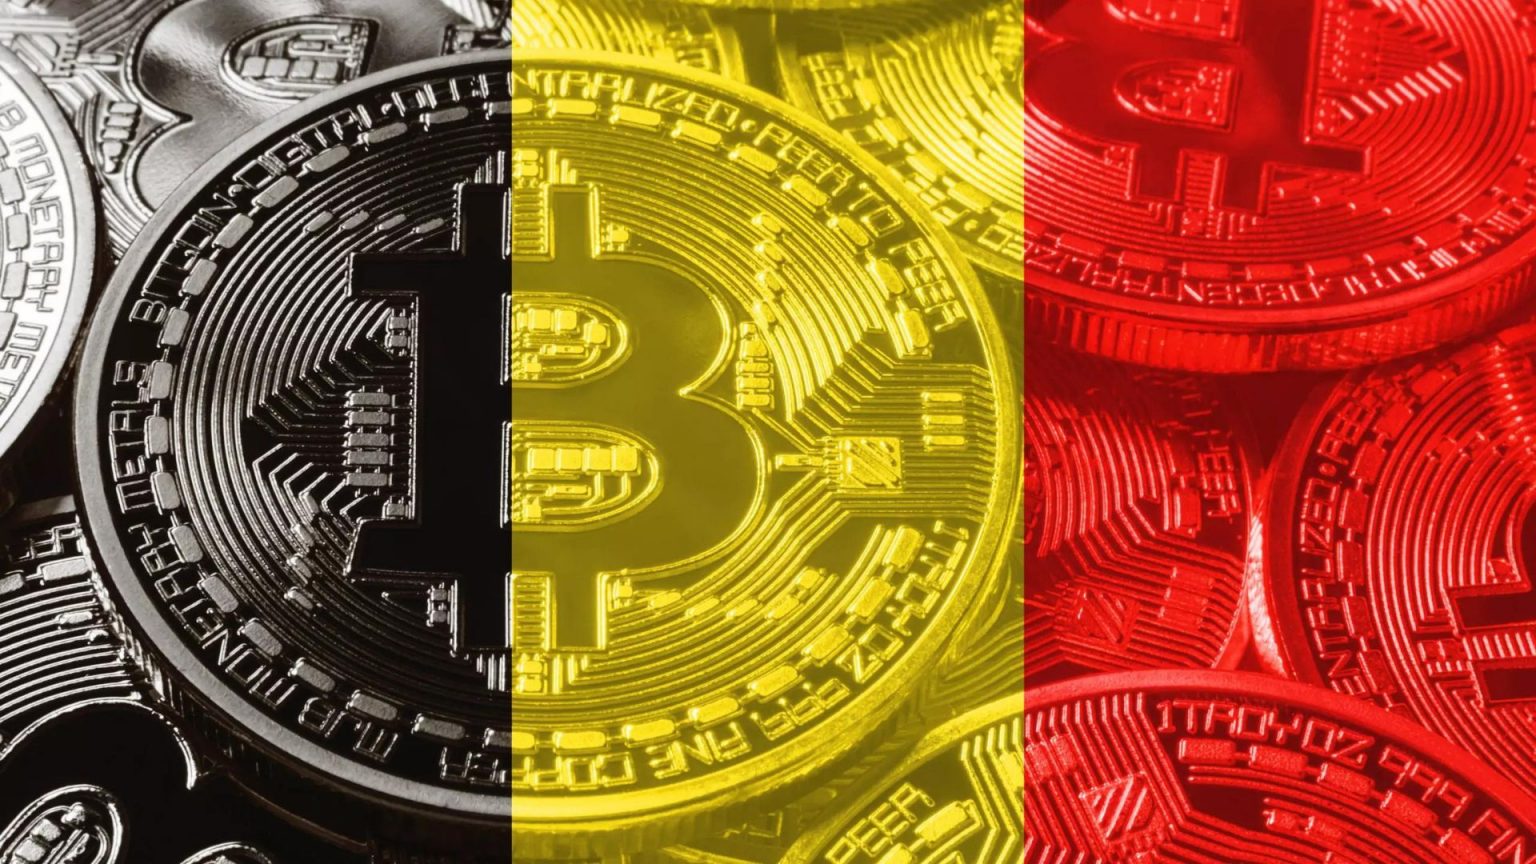 illicit financial flows and cryptocurrencies in europe